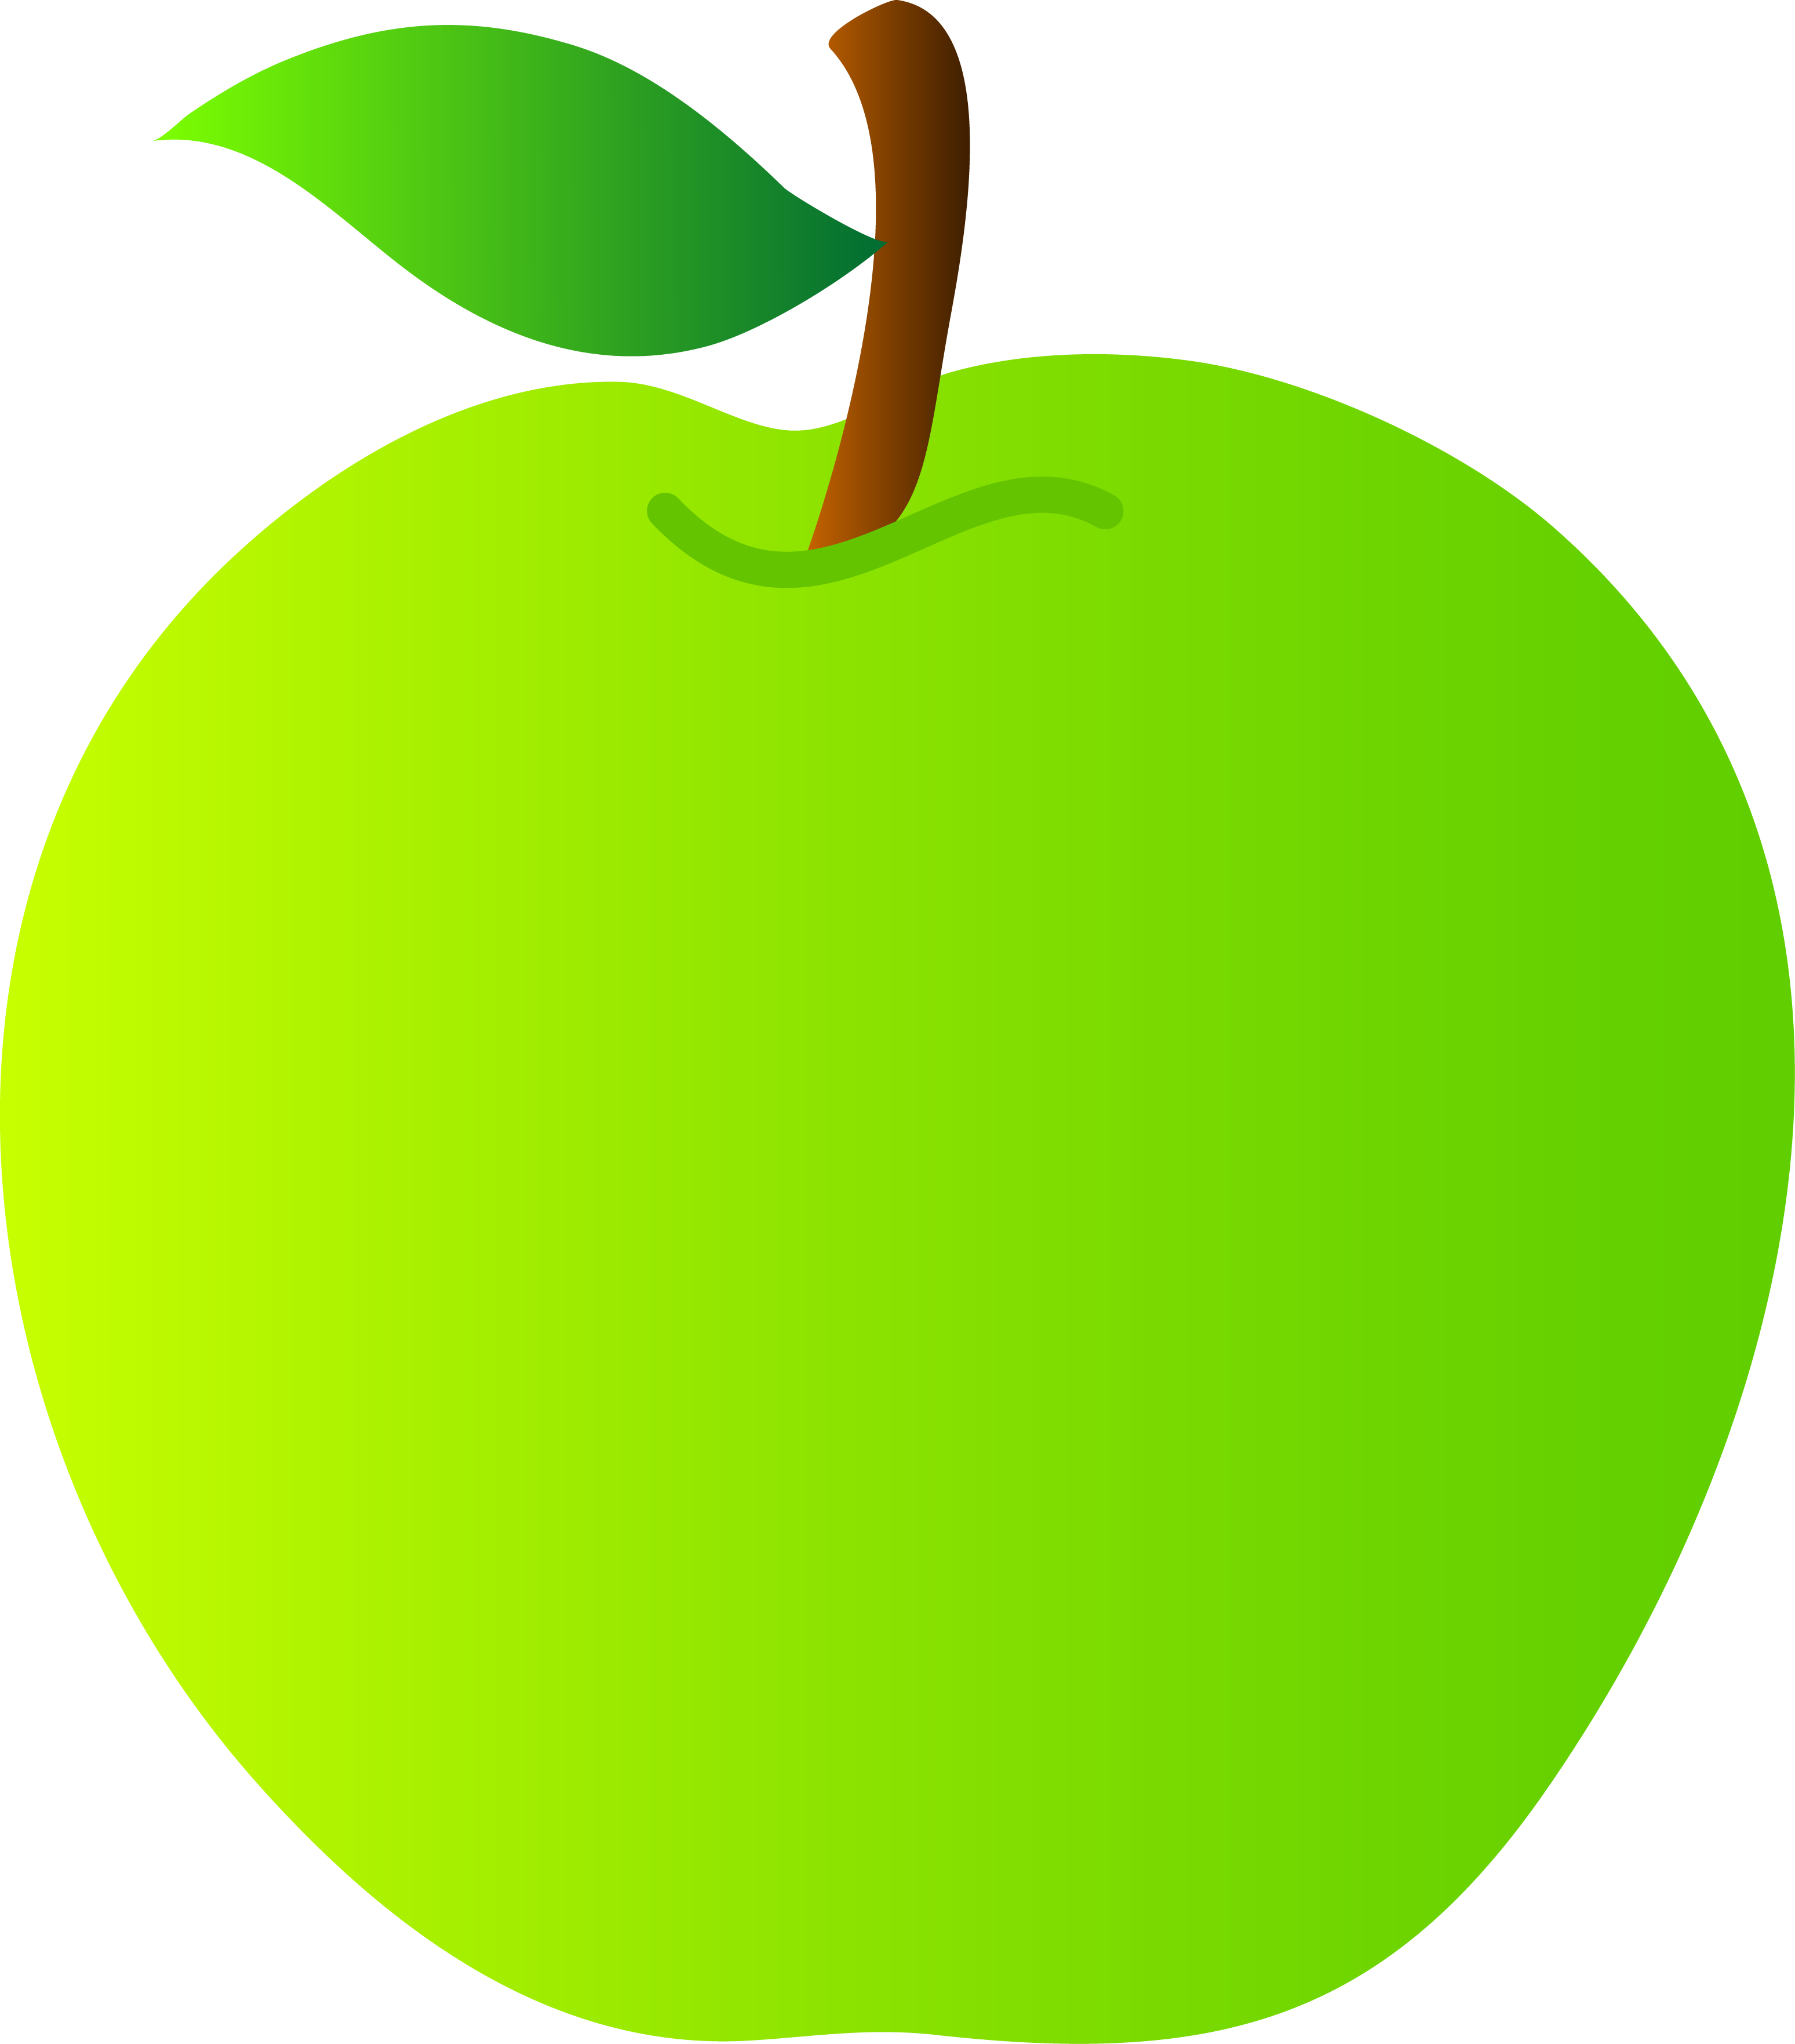 File:Apple green clipart.png | Clipart Panda - Free Clipart Images